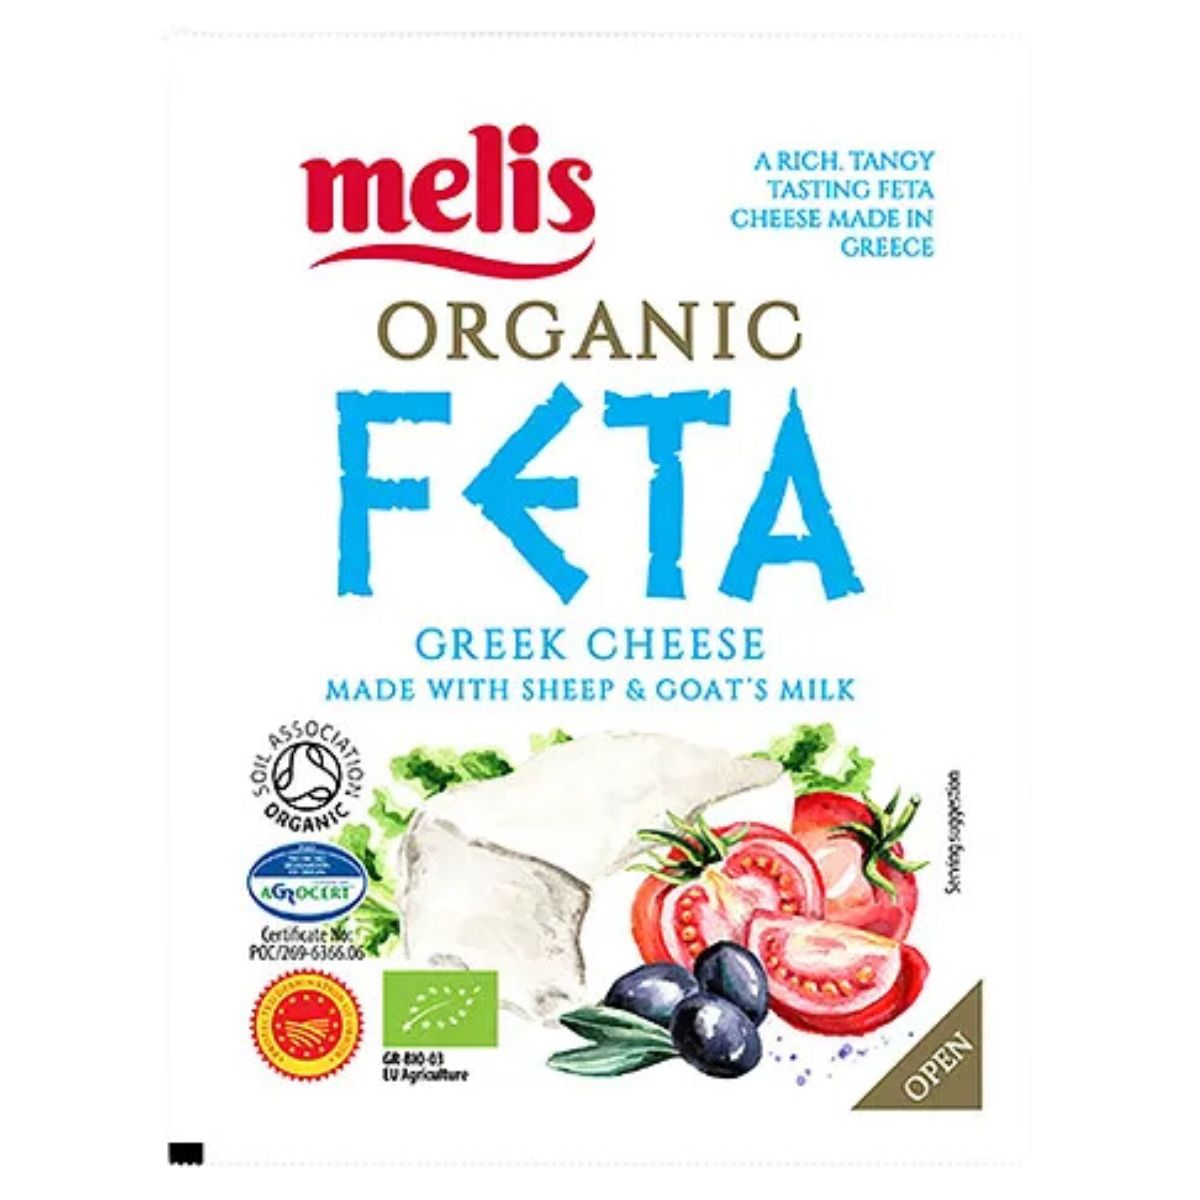 A package of Melis - Organic Feta Cheese - 200g with vegetables and text.